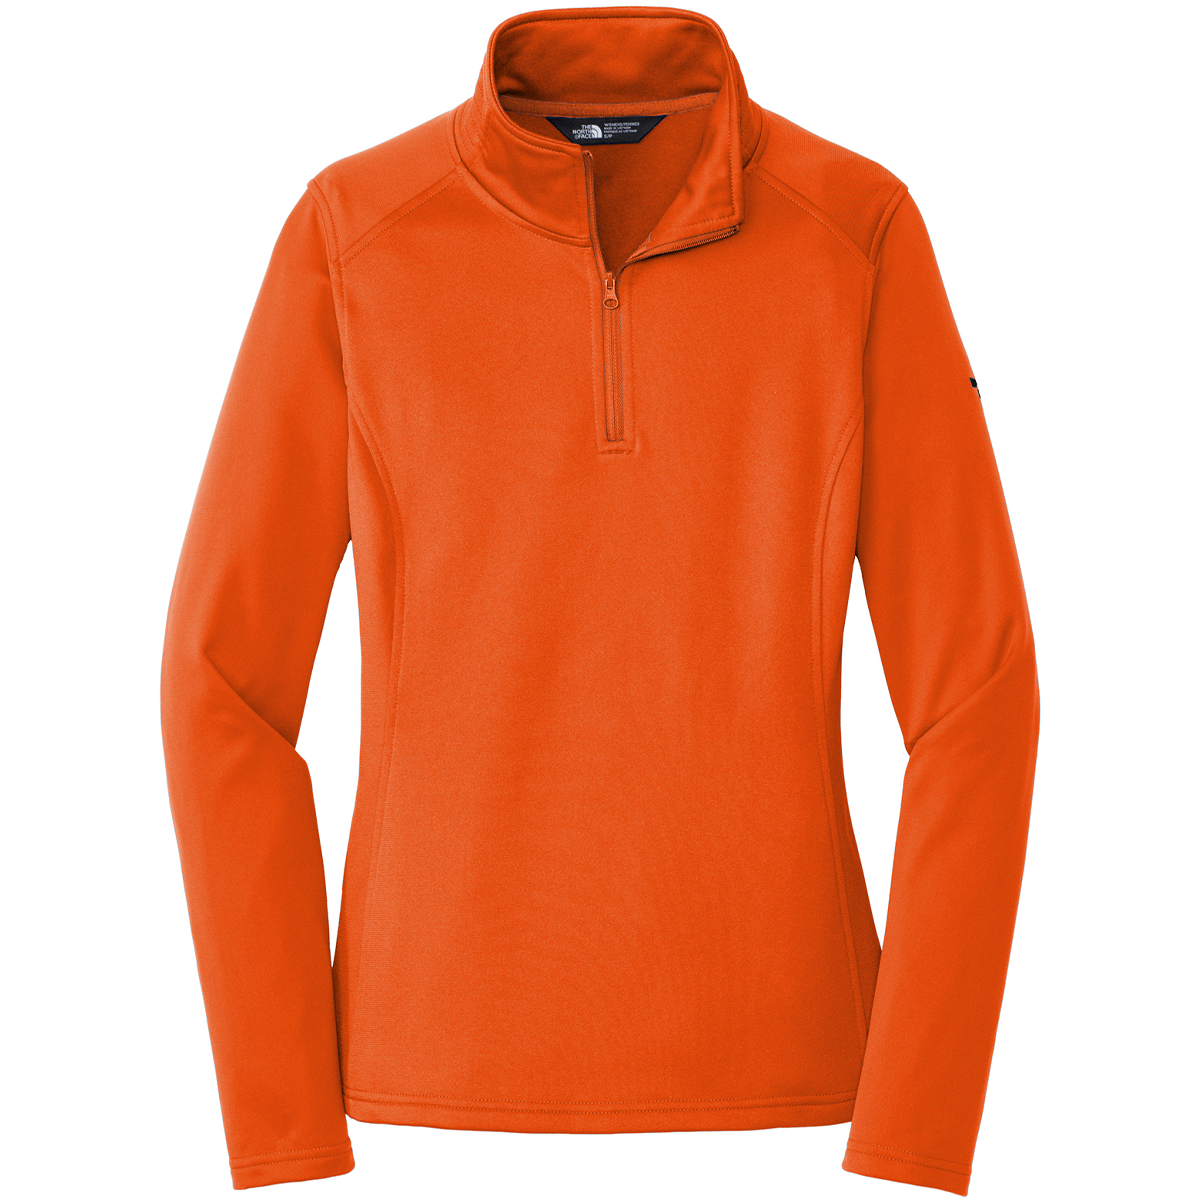 The North Face Ladies Tech 1/4 Zip